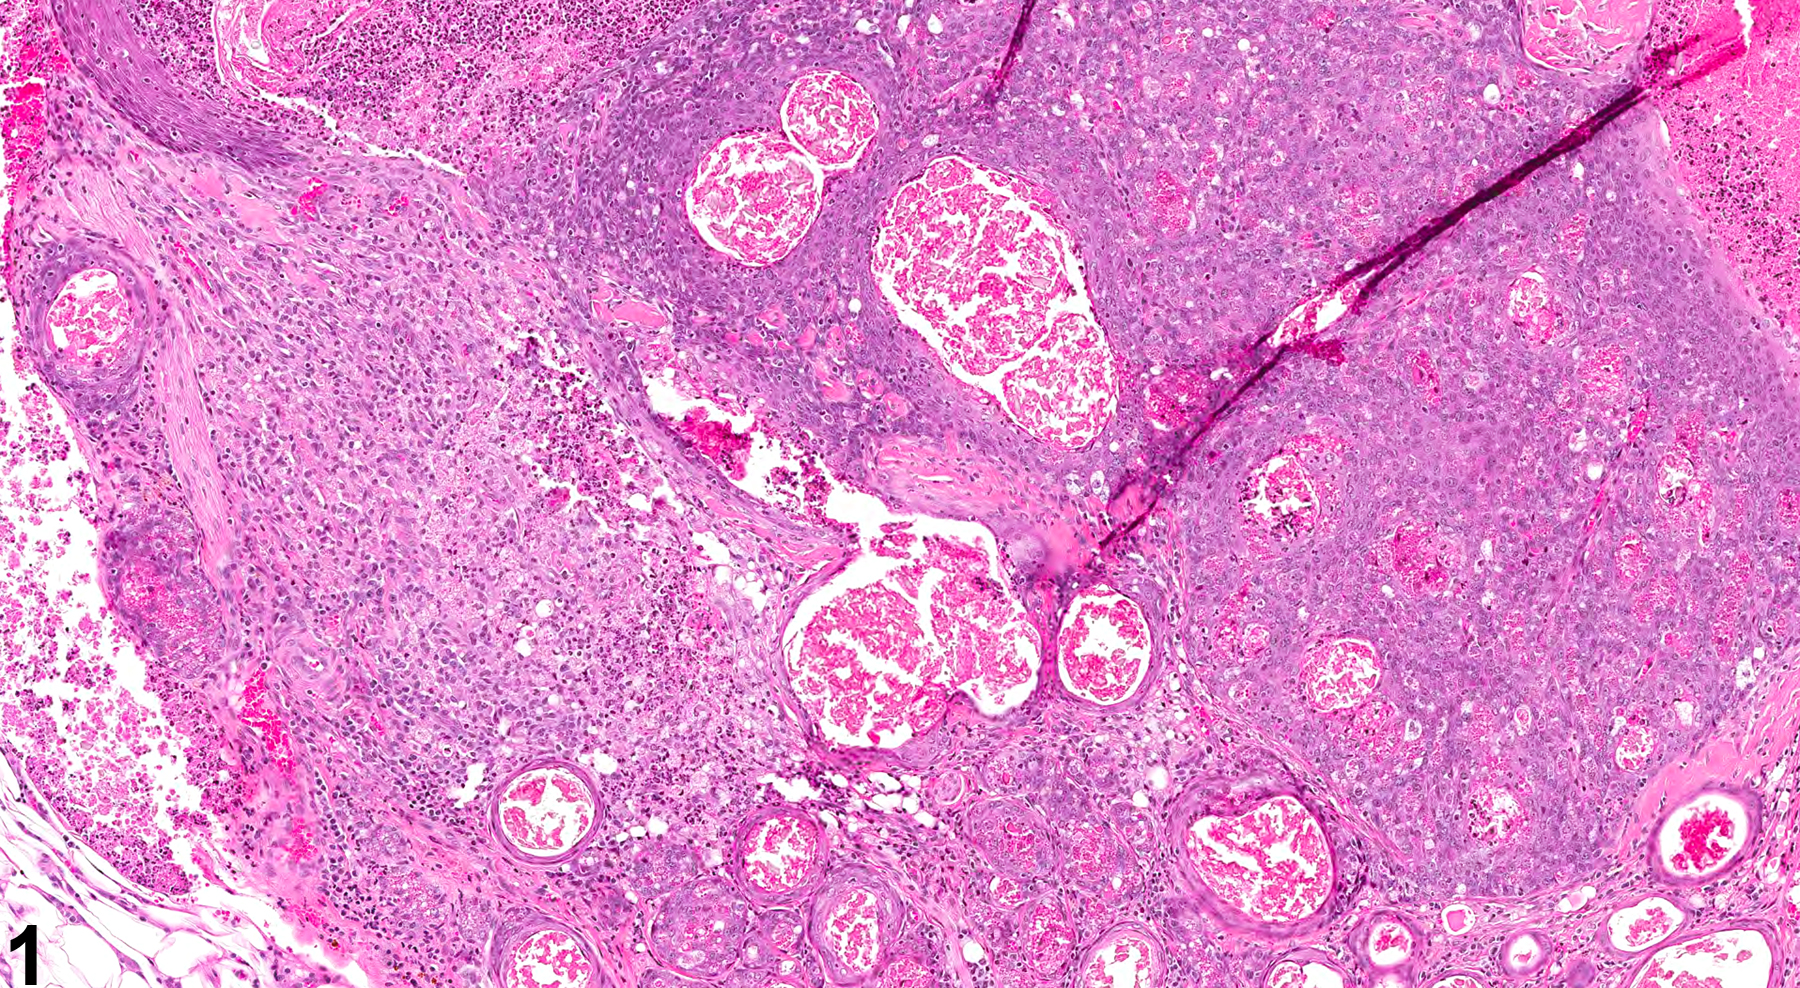 Image of inflammation, chronic active in the clitoral gland from a female F344/N rat in a chronic study